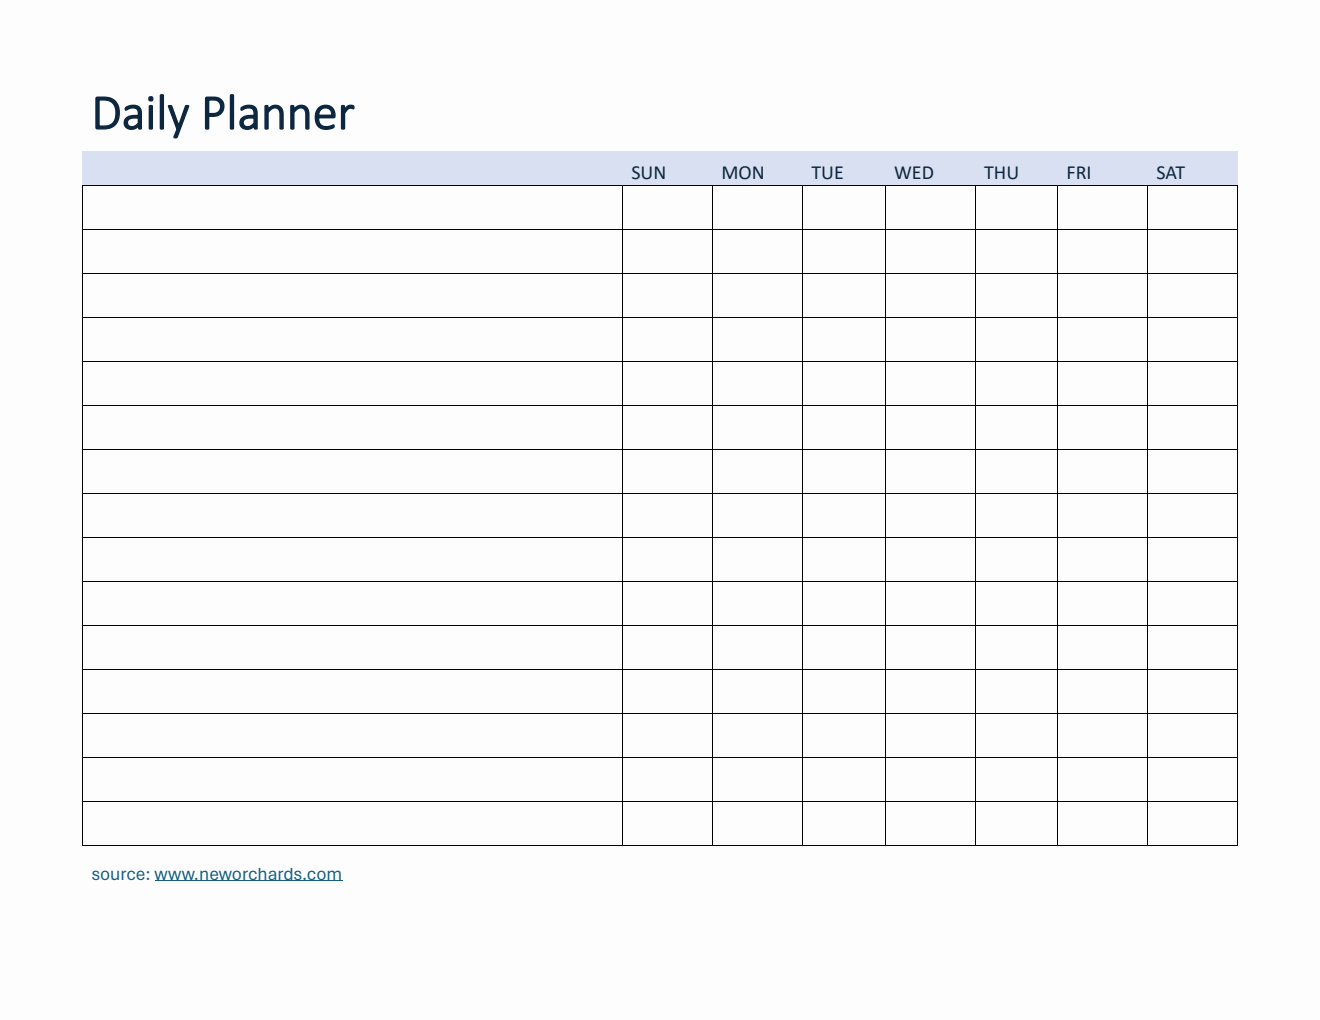 Daily Planner and Checklist Template in Word (Customizable)